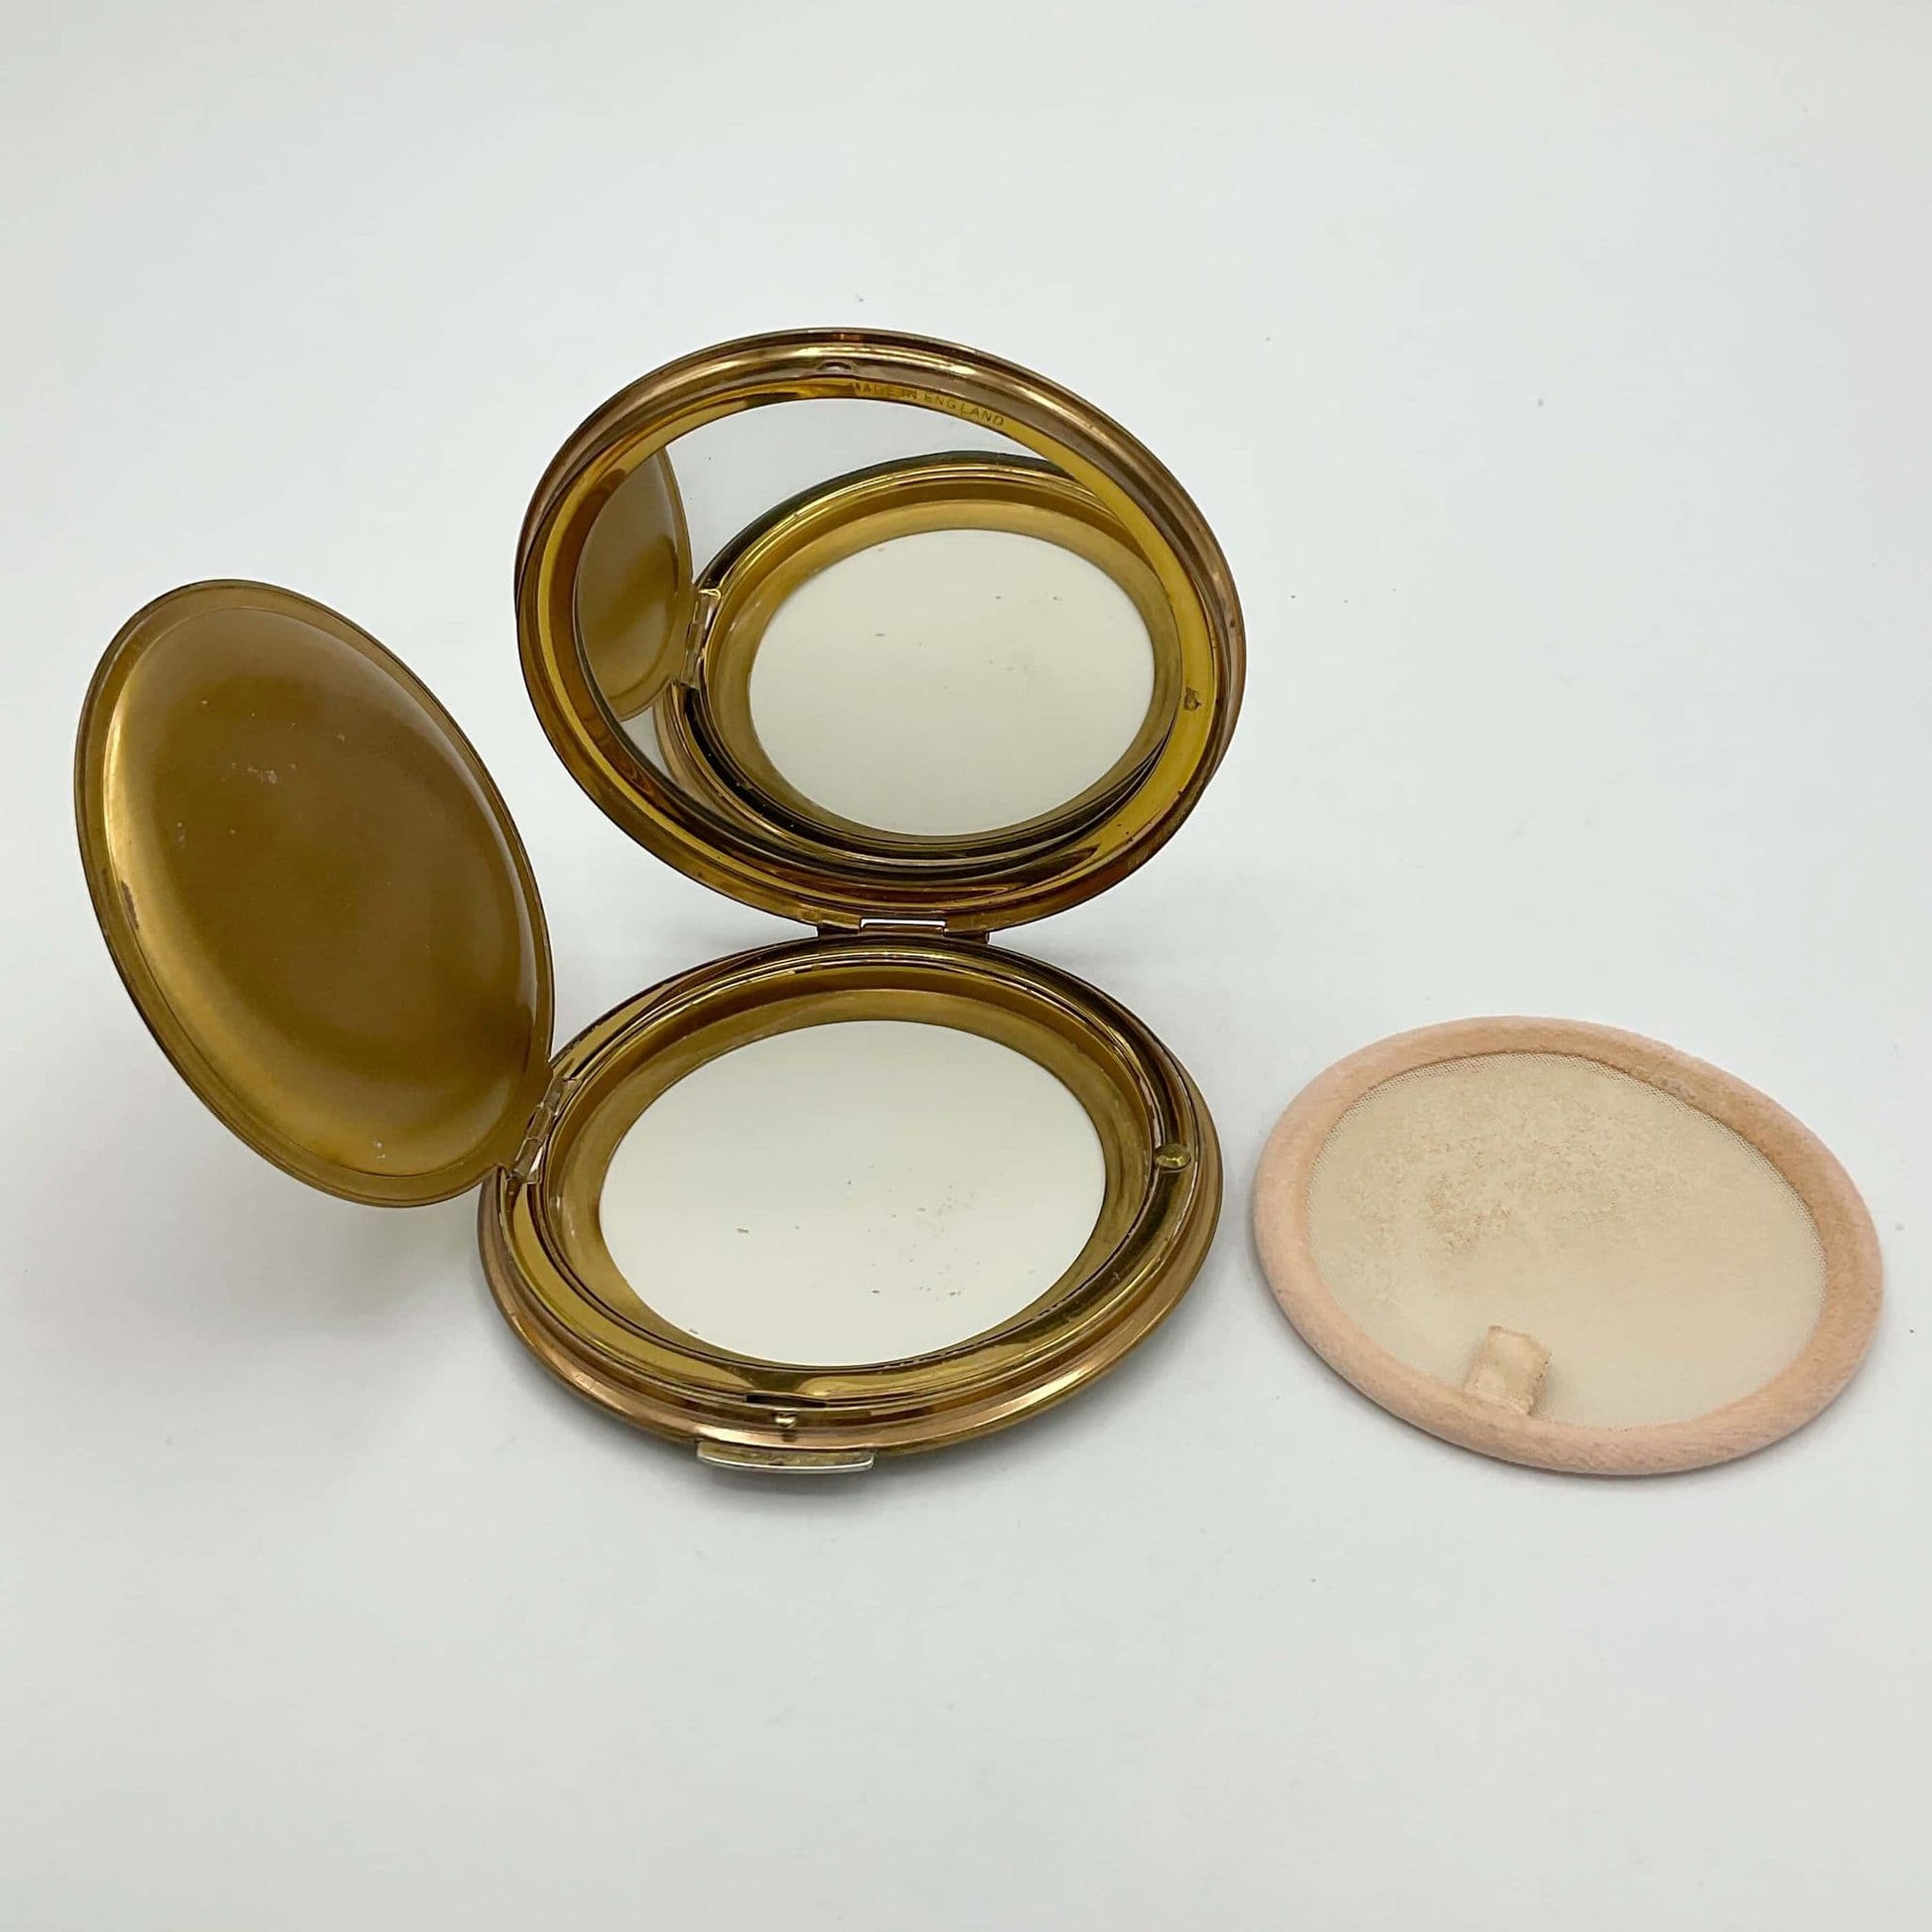 open powder compact showing a clear mirror, a clean powder area and a powder screen